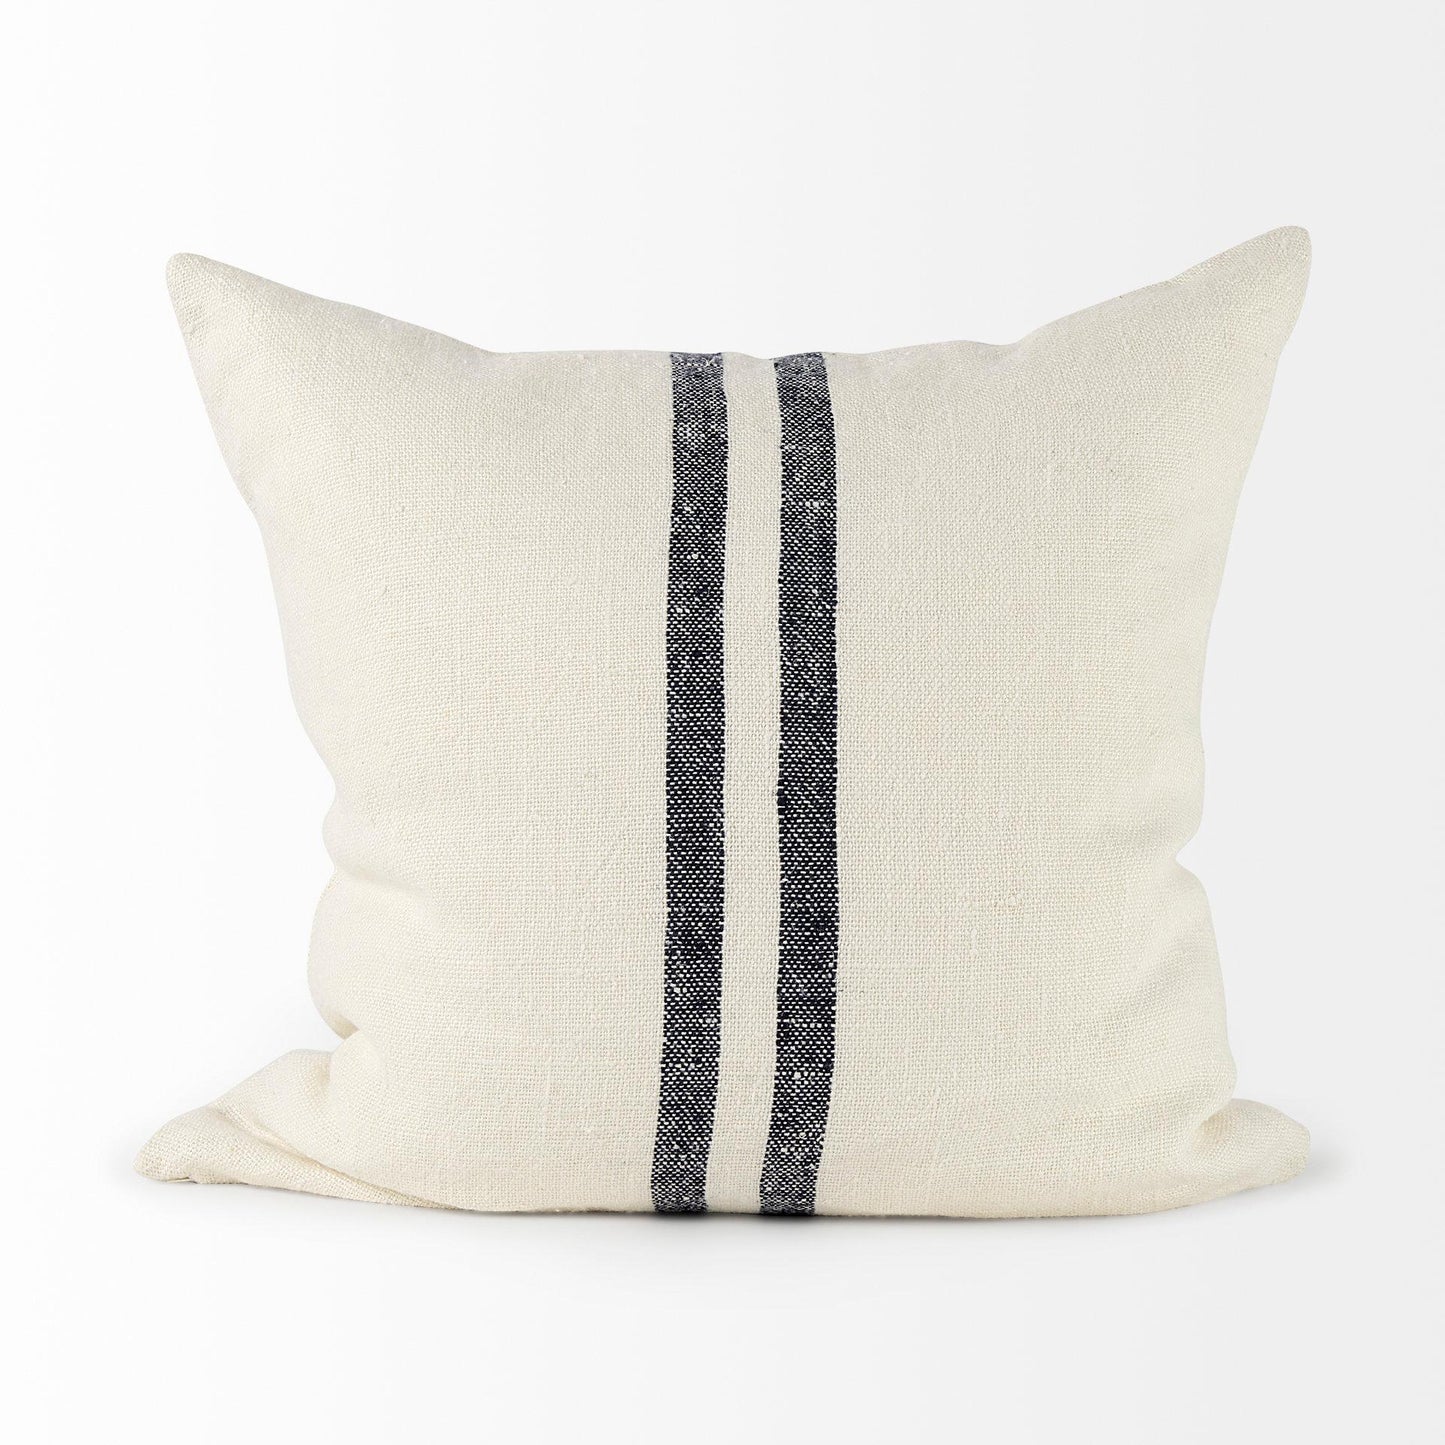 Sandra 22 x 22 Beige With Blue Stripes Decorative Pillow Cover